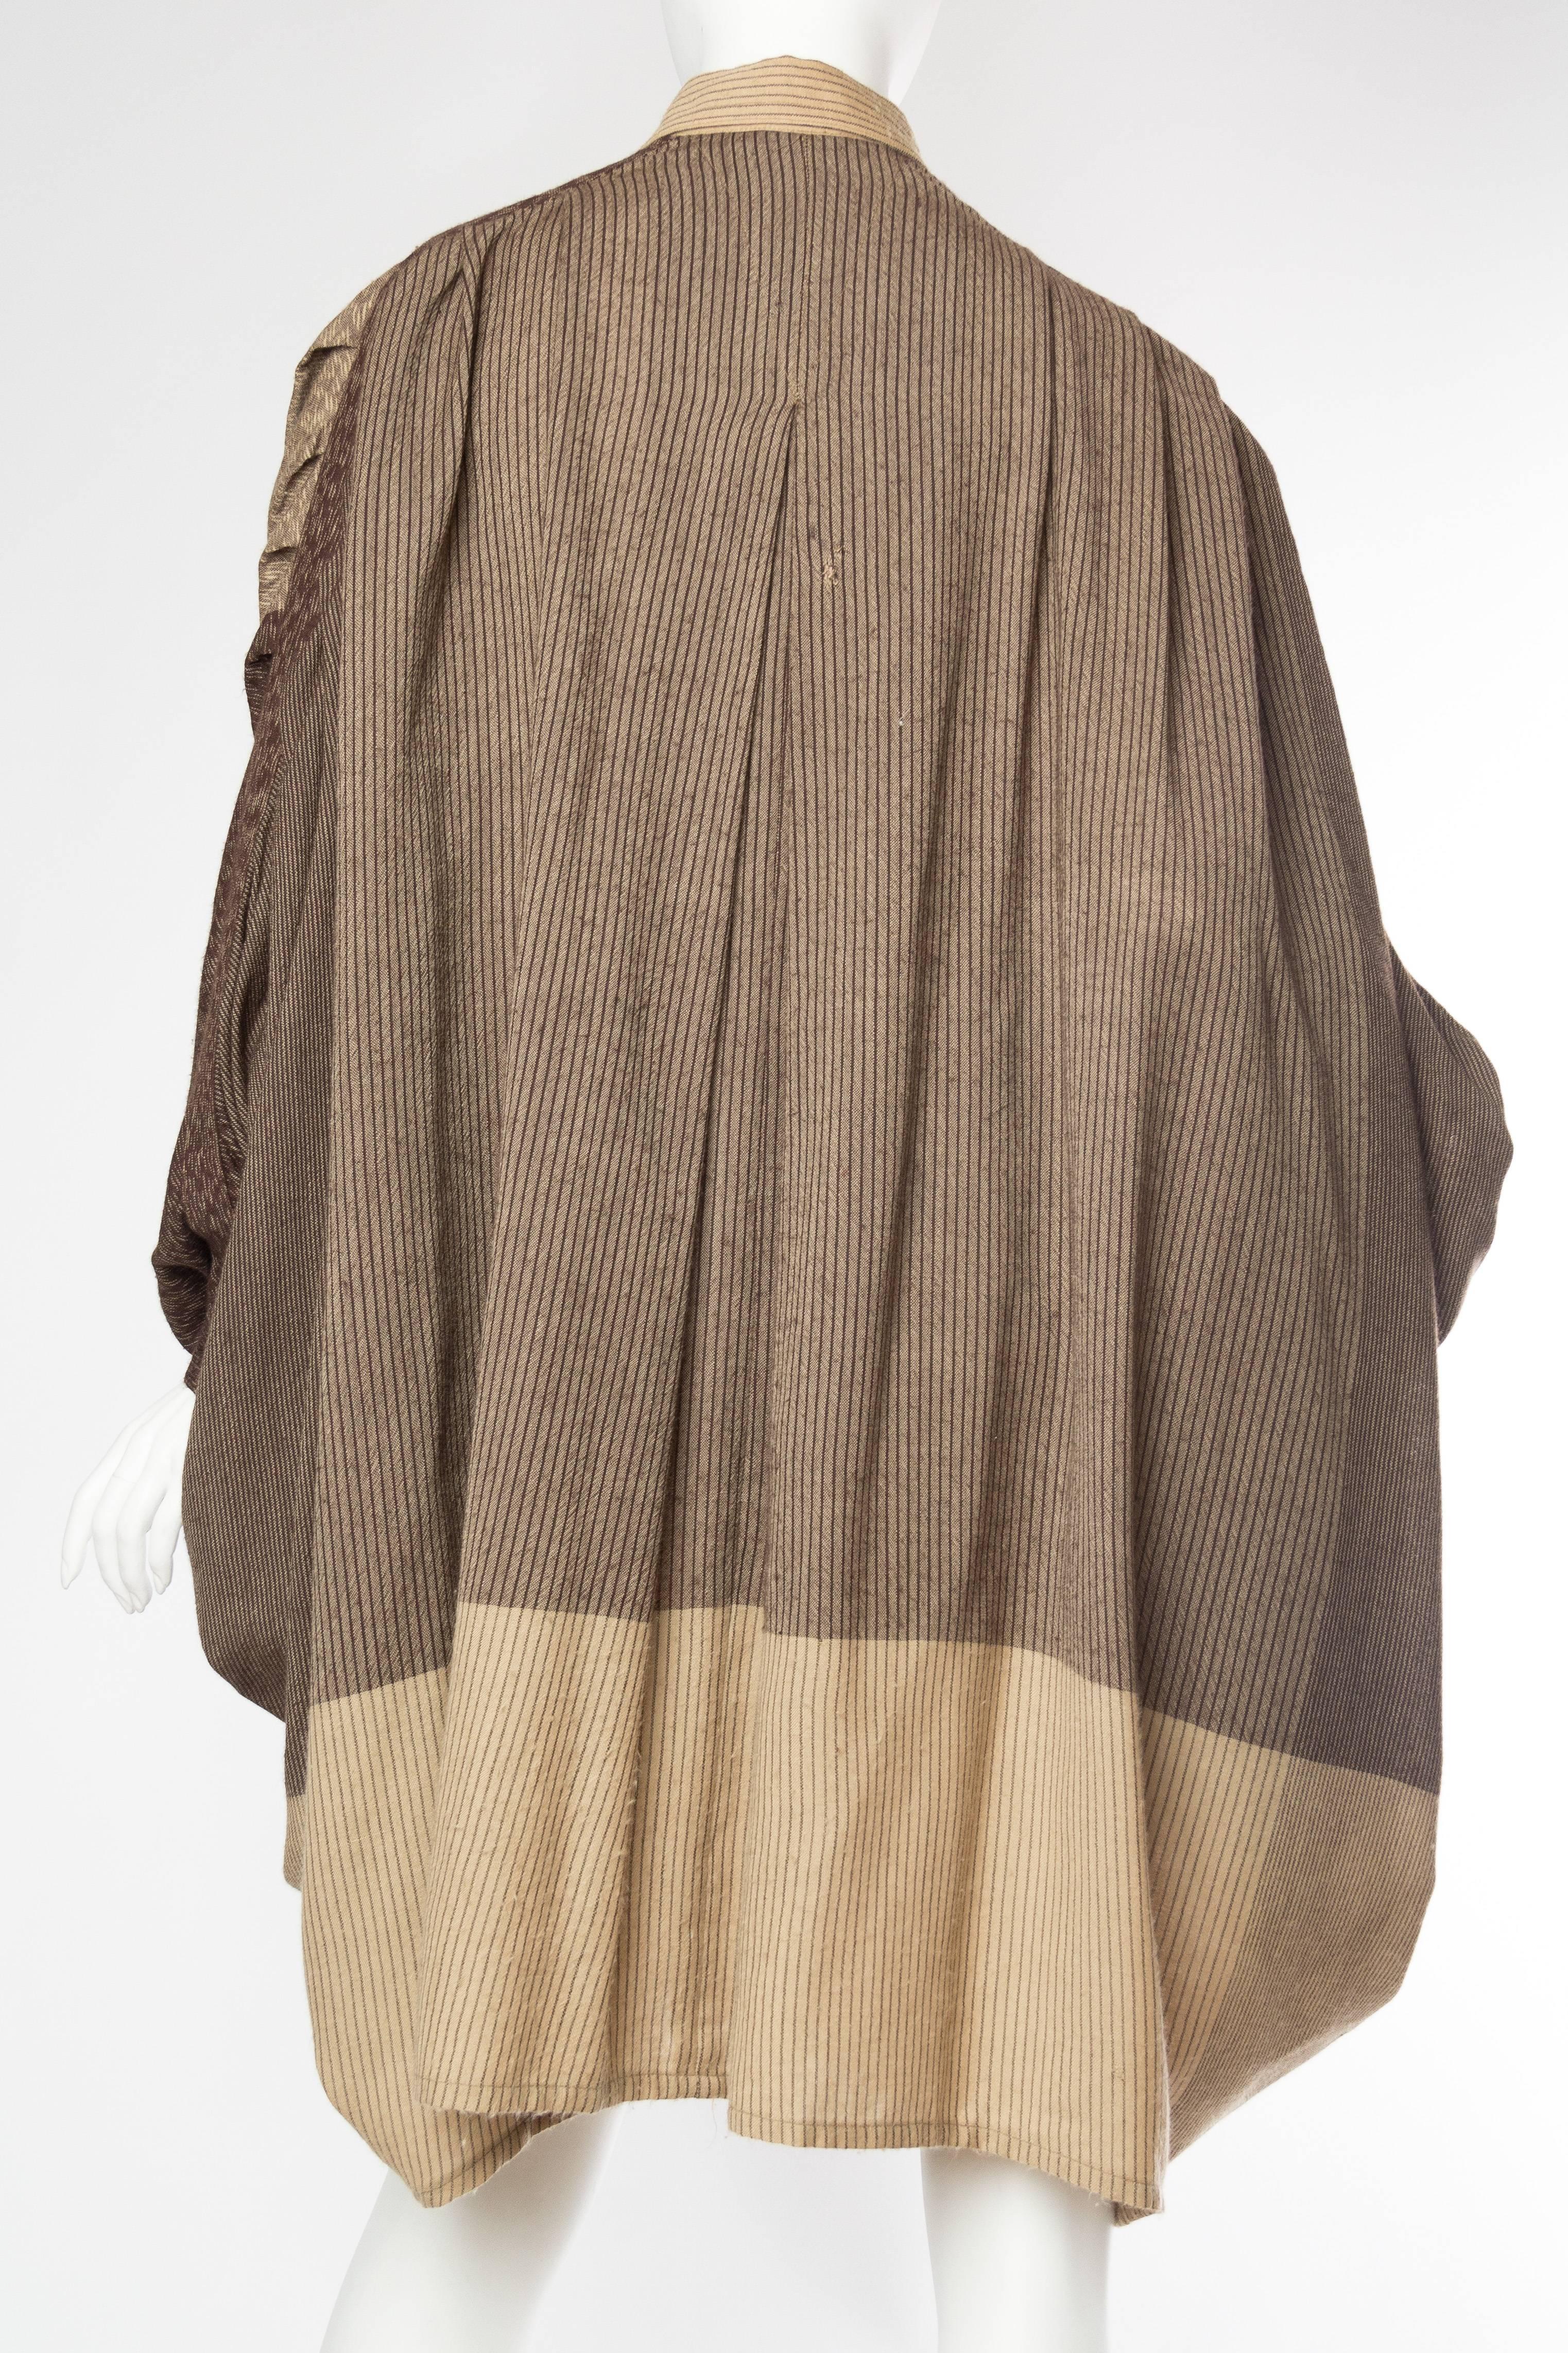 1980S ISSEY MIYAKE Tan & Brown Wool Blend Oversized Shirt Pleated Pants Ensemble For Sale 2